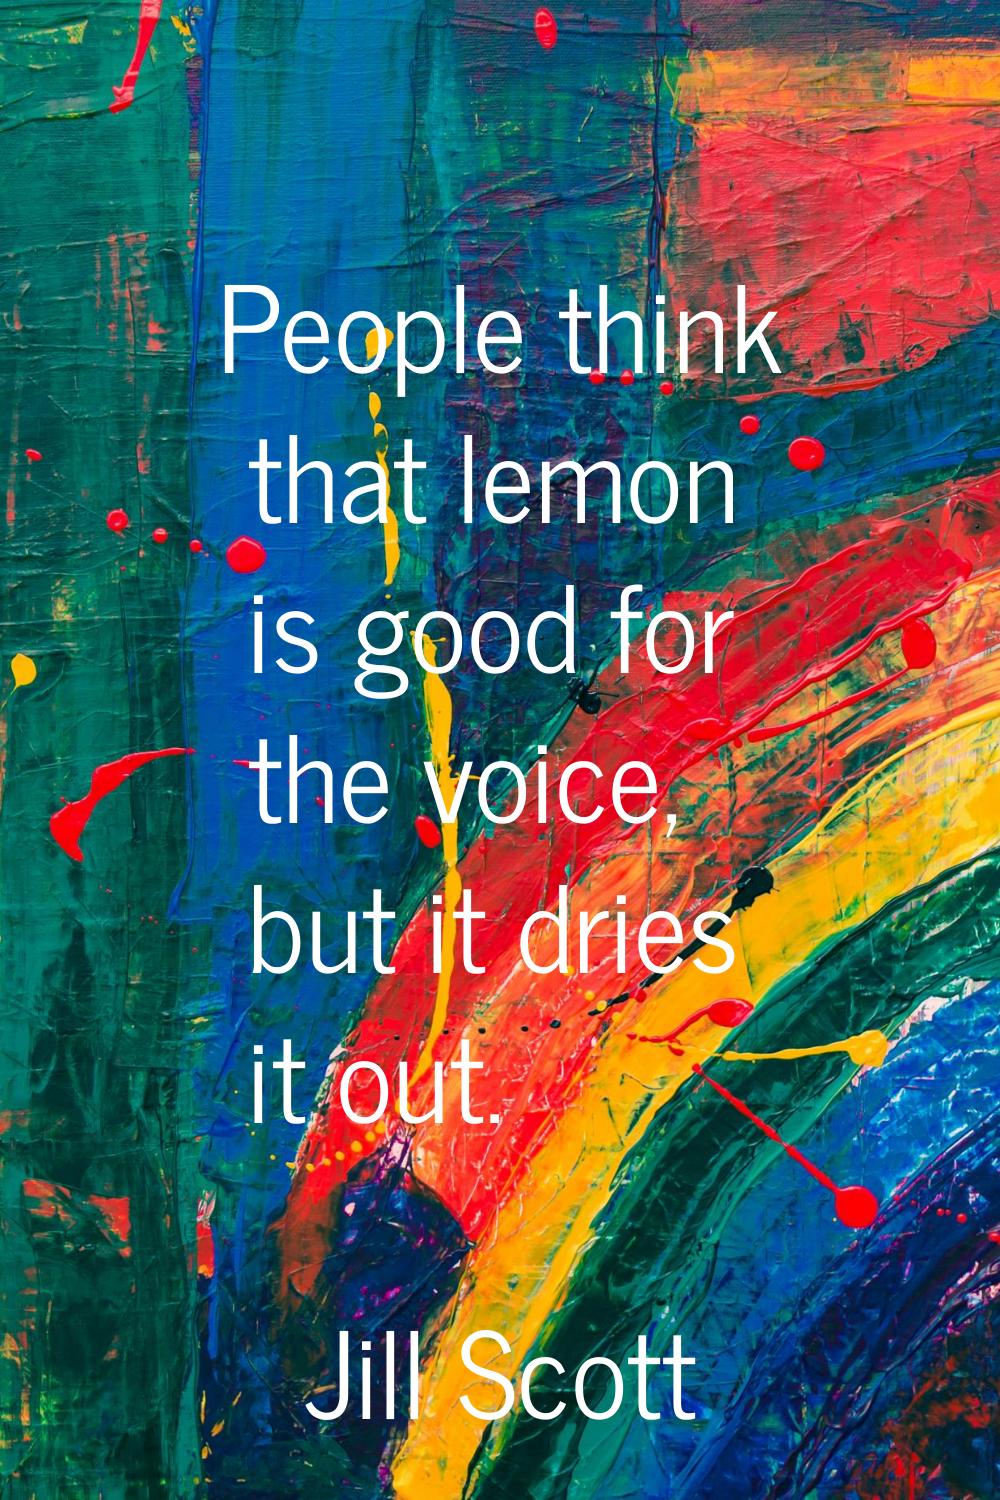 People think that lemon is good for the voice, but it dries it out.